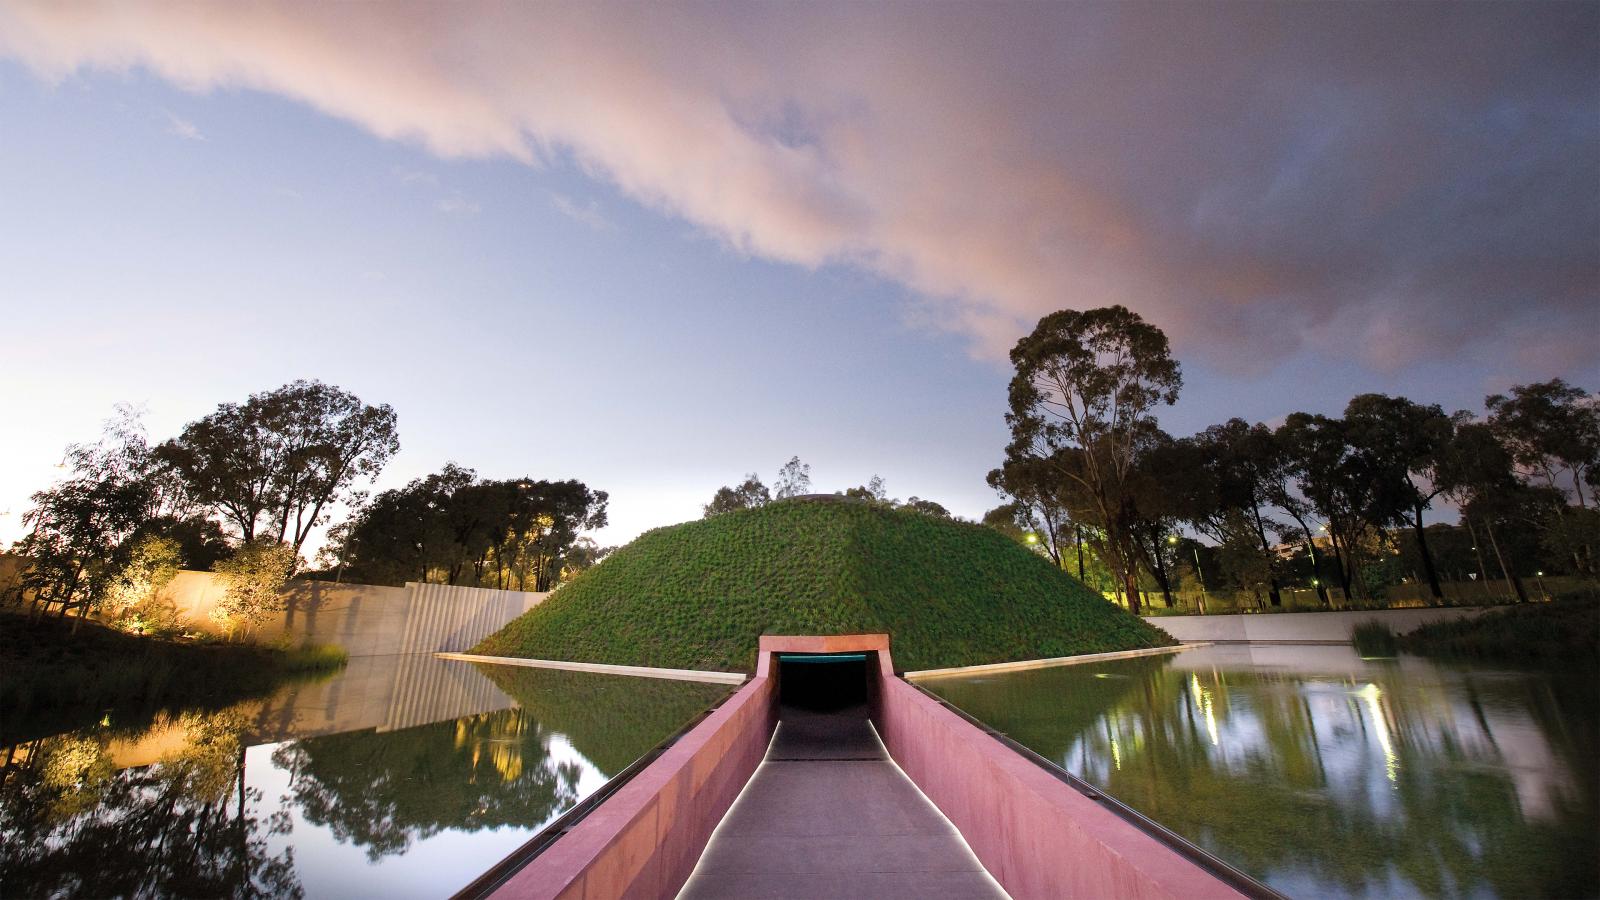 A view of the Skyspace installation at the National Gallery of Australia, featuring a green, grassy mound surrounded by water in the Australian Garden. The sky is partly cloudy and the scene is reflected in the still water, creating a serene and symmetrical composition at NGA.